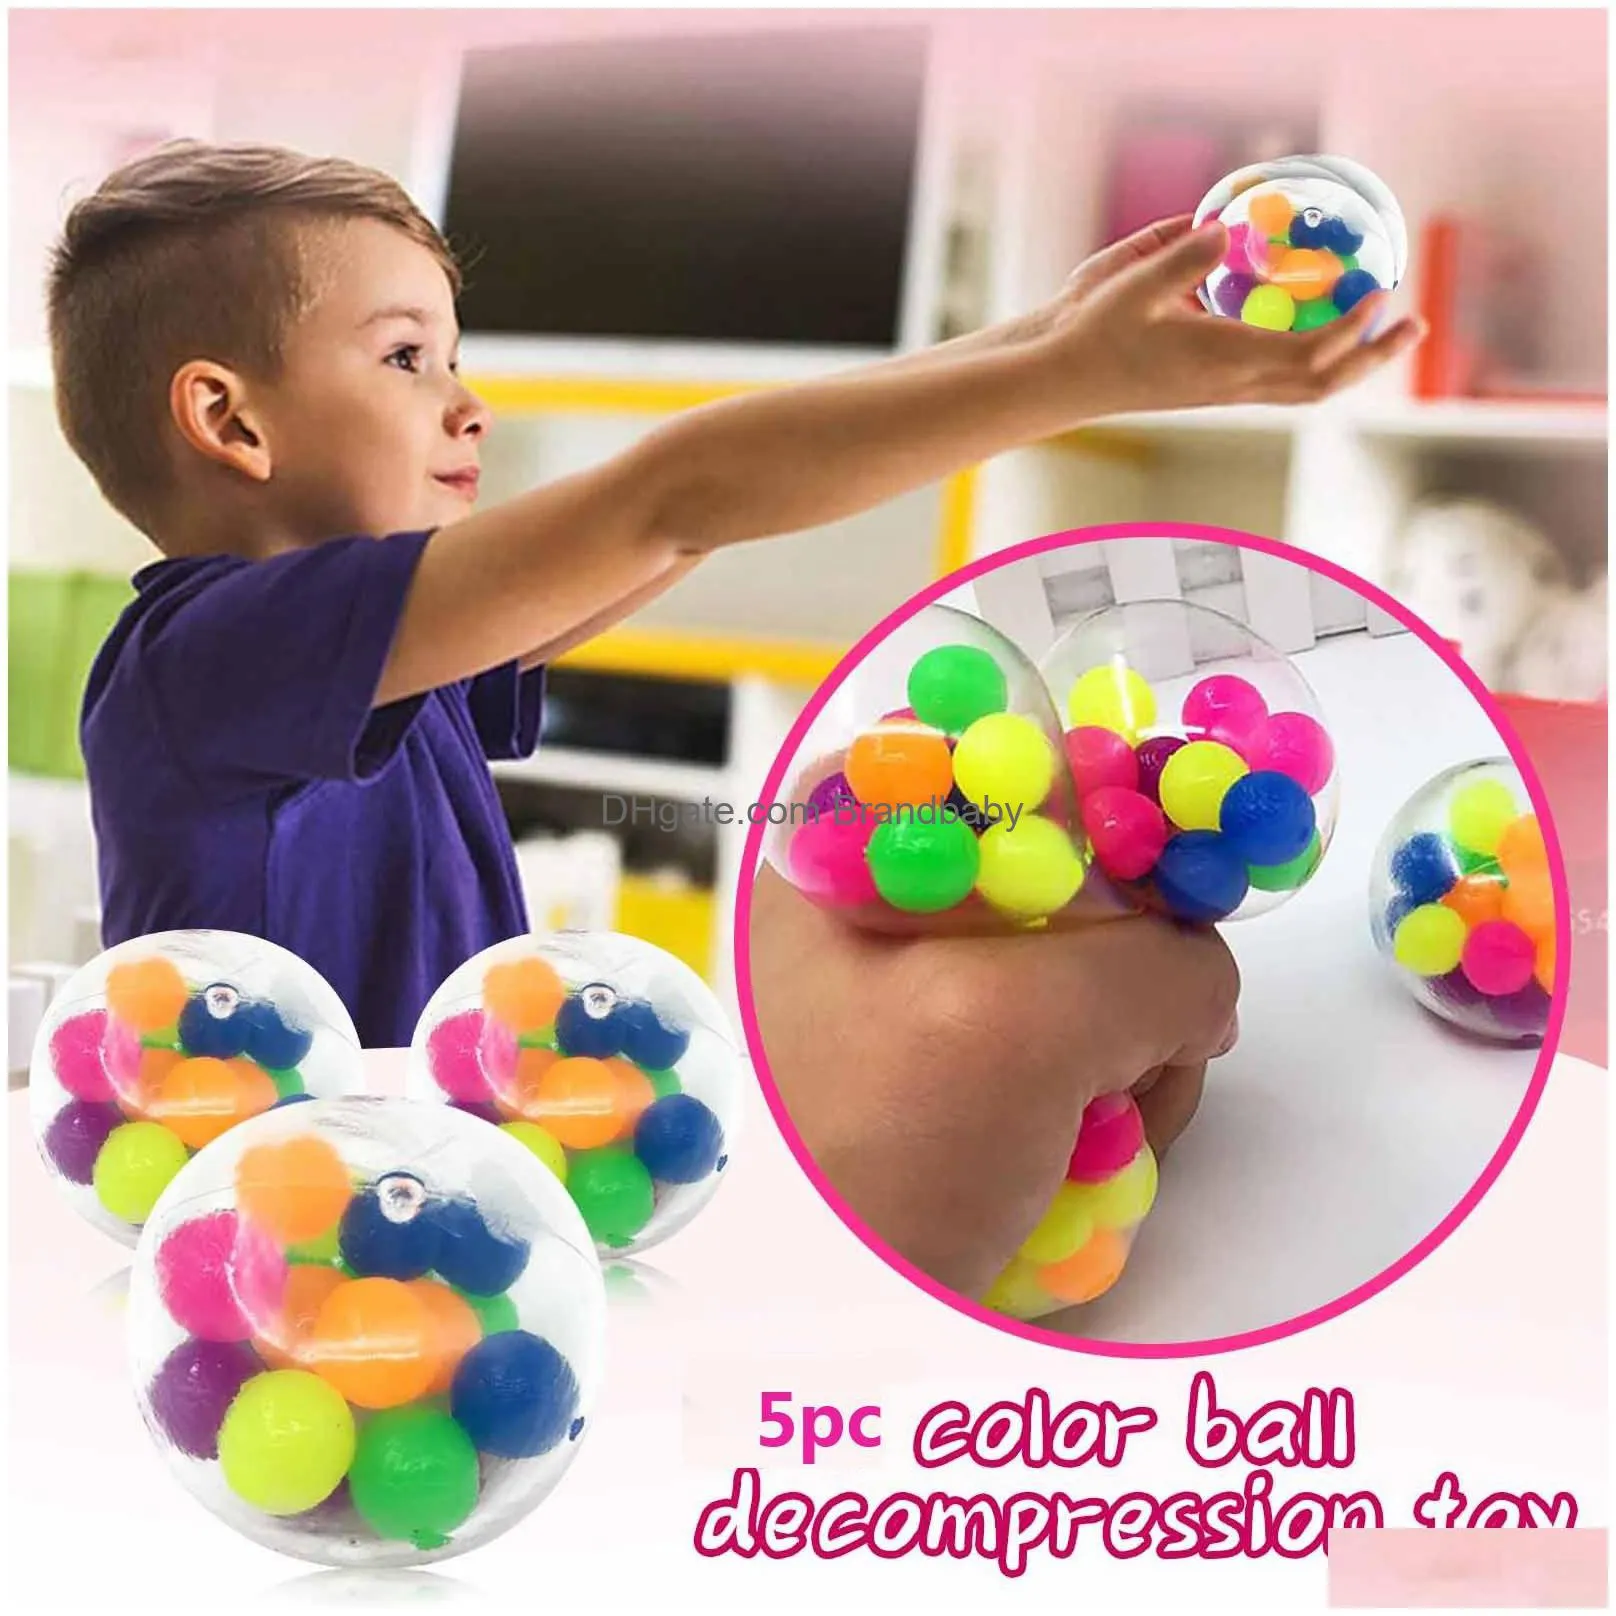 color sensory toy office stress ball pressure ball stress reliever toy2mldecompression fidget toy stress relief gift dhs bs20